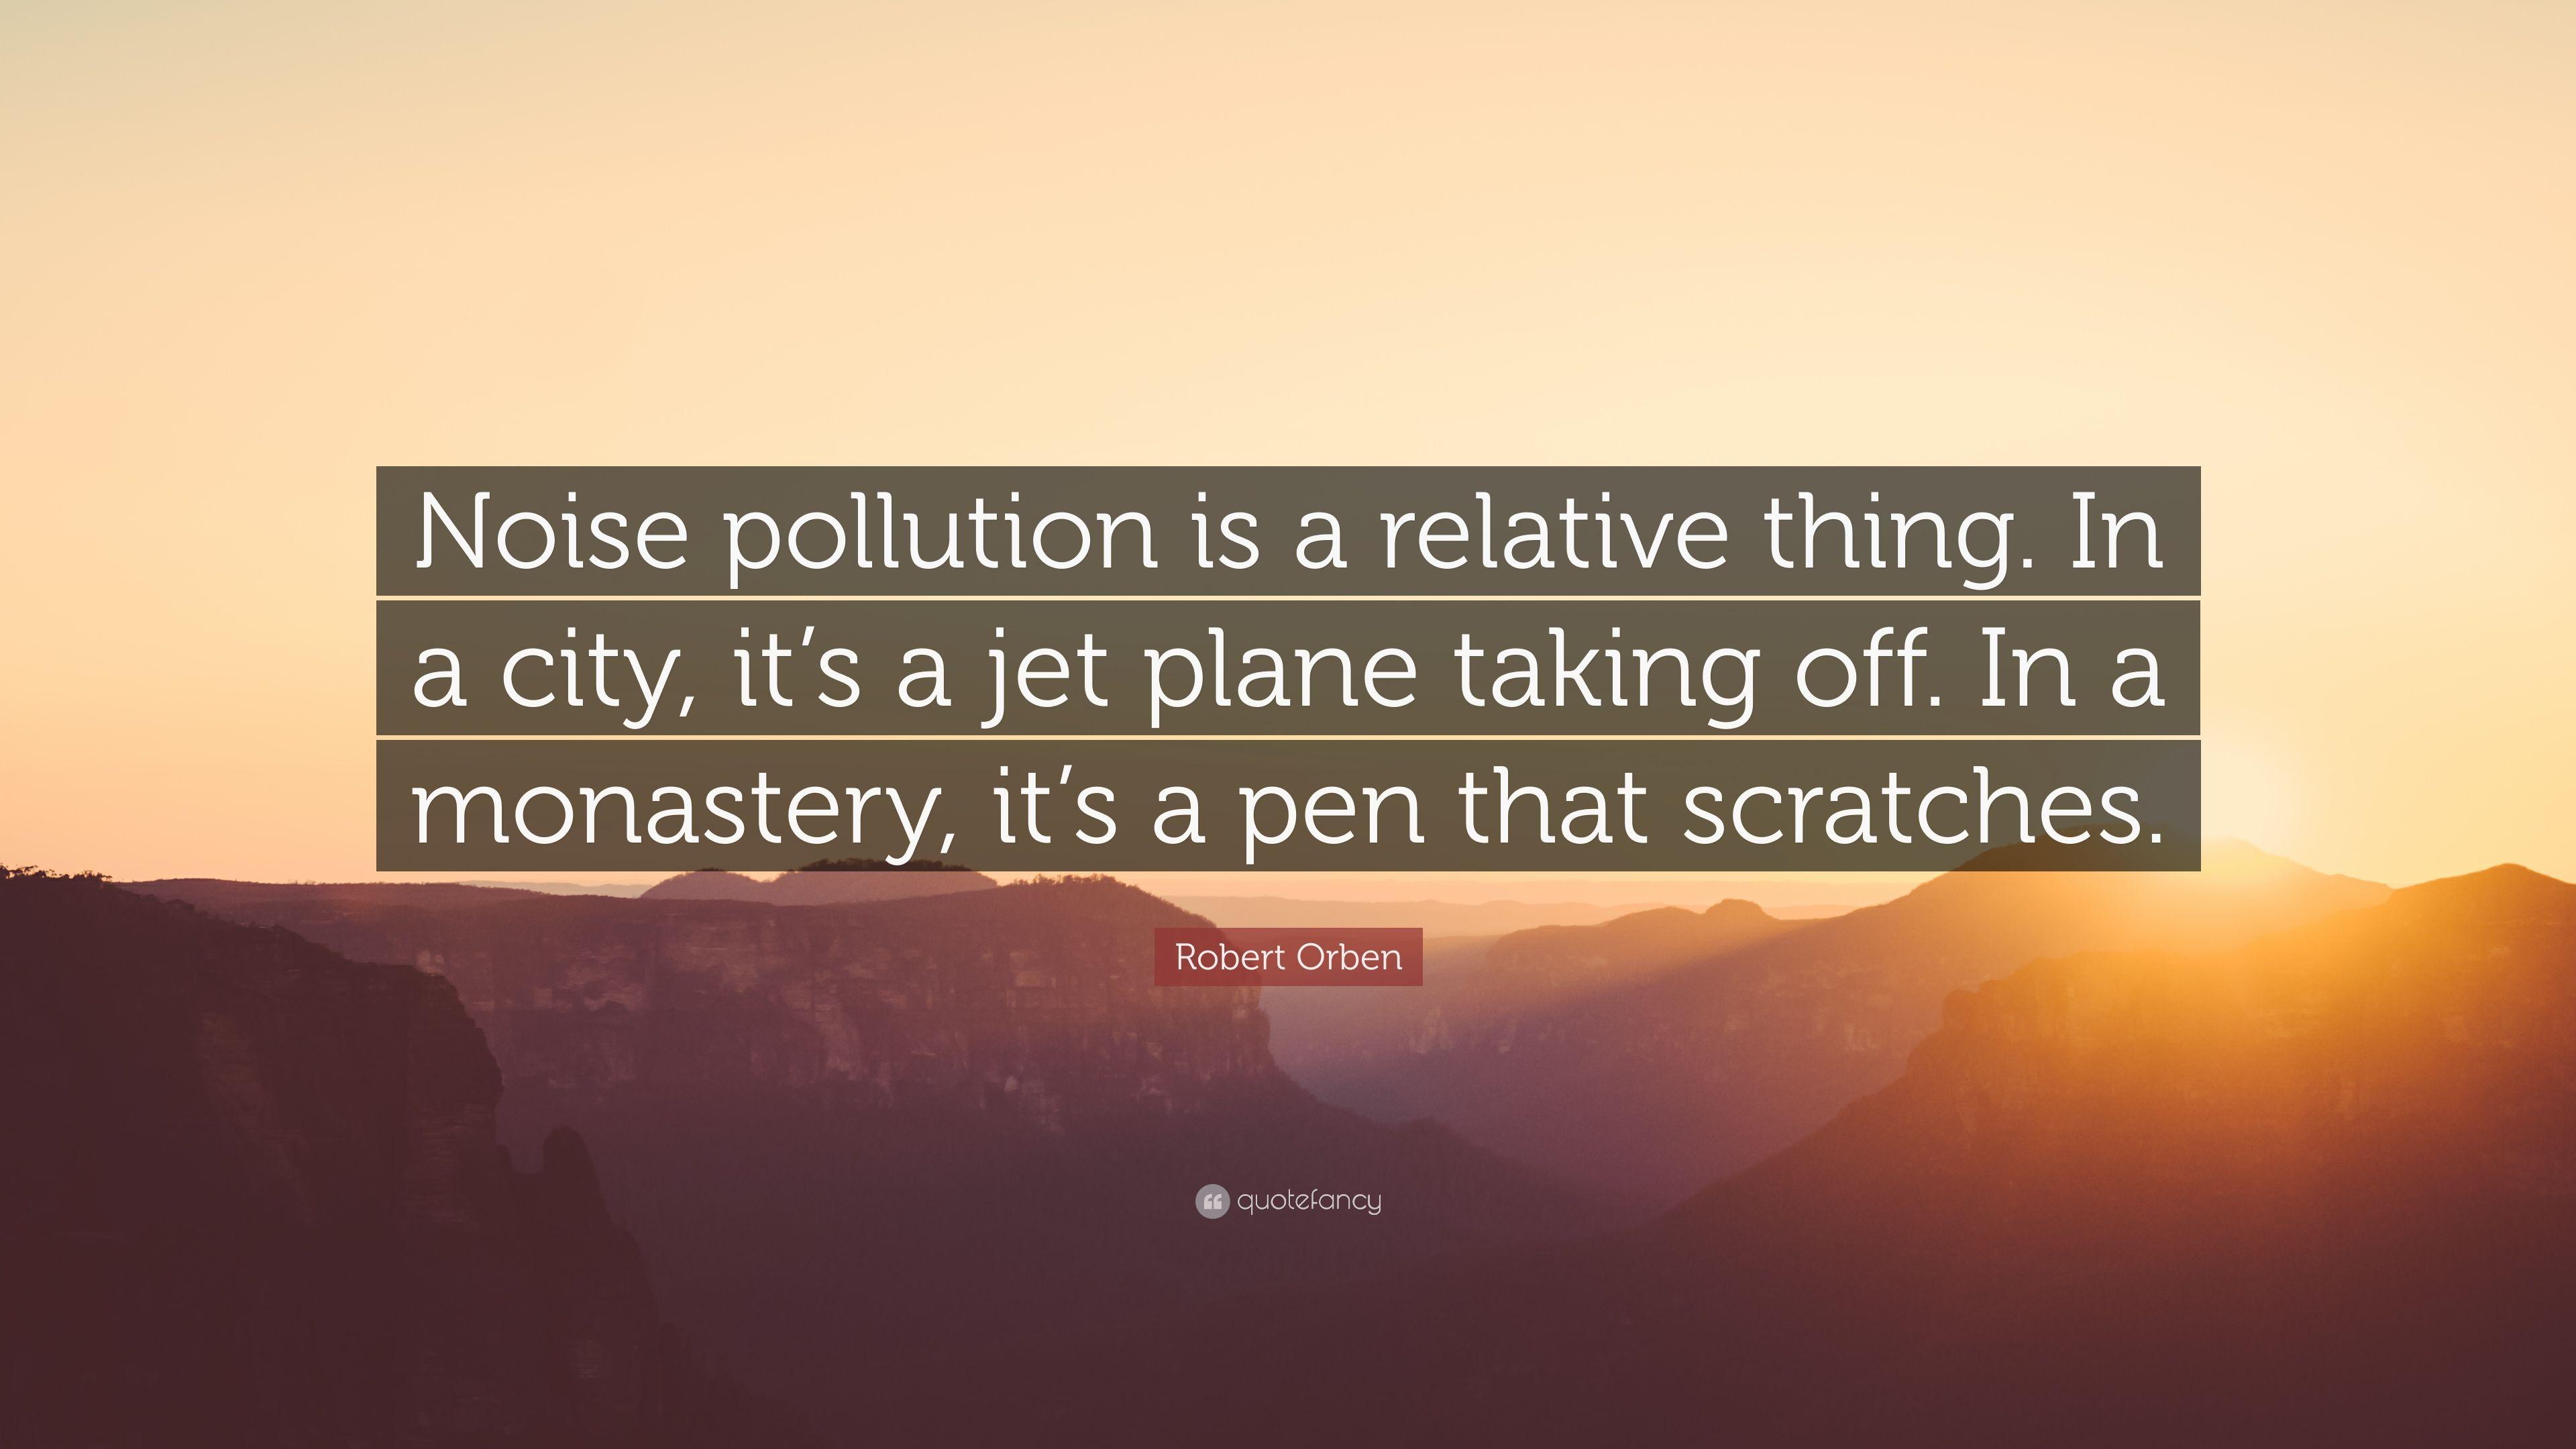 Robert Orben Quote: “Noise pollution is a relative thing. In a city